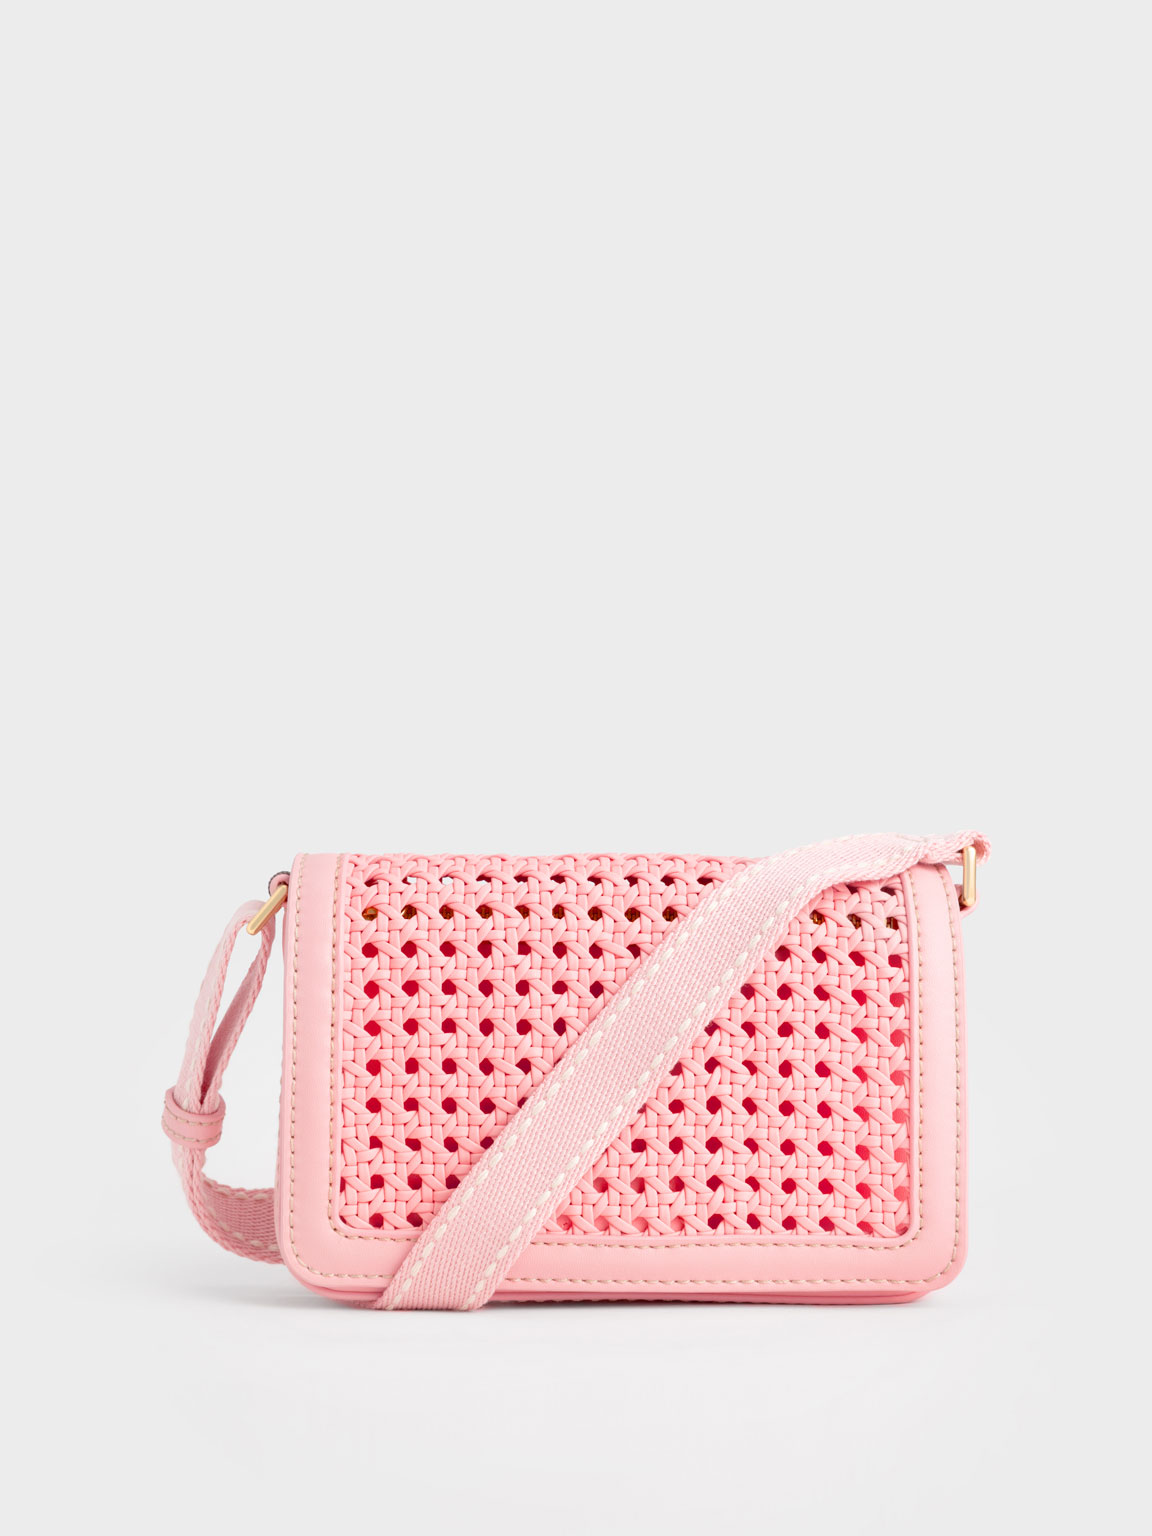 Charles & Keith Cecily Woven Shoulder Bag In Light Pink